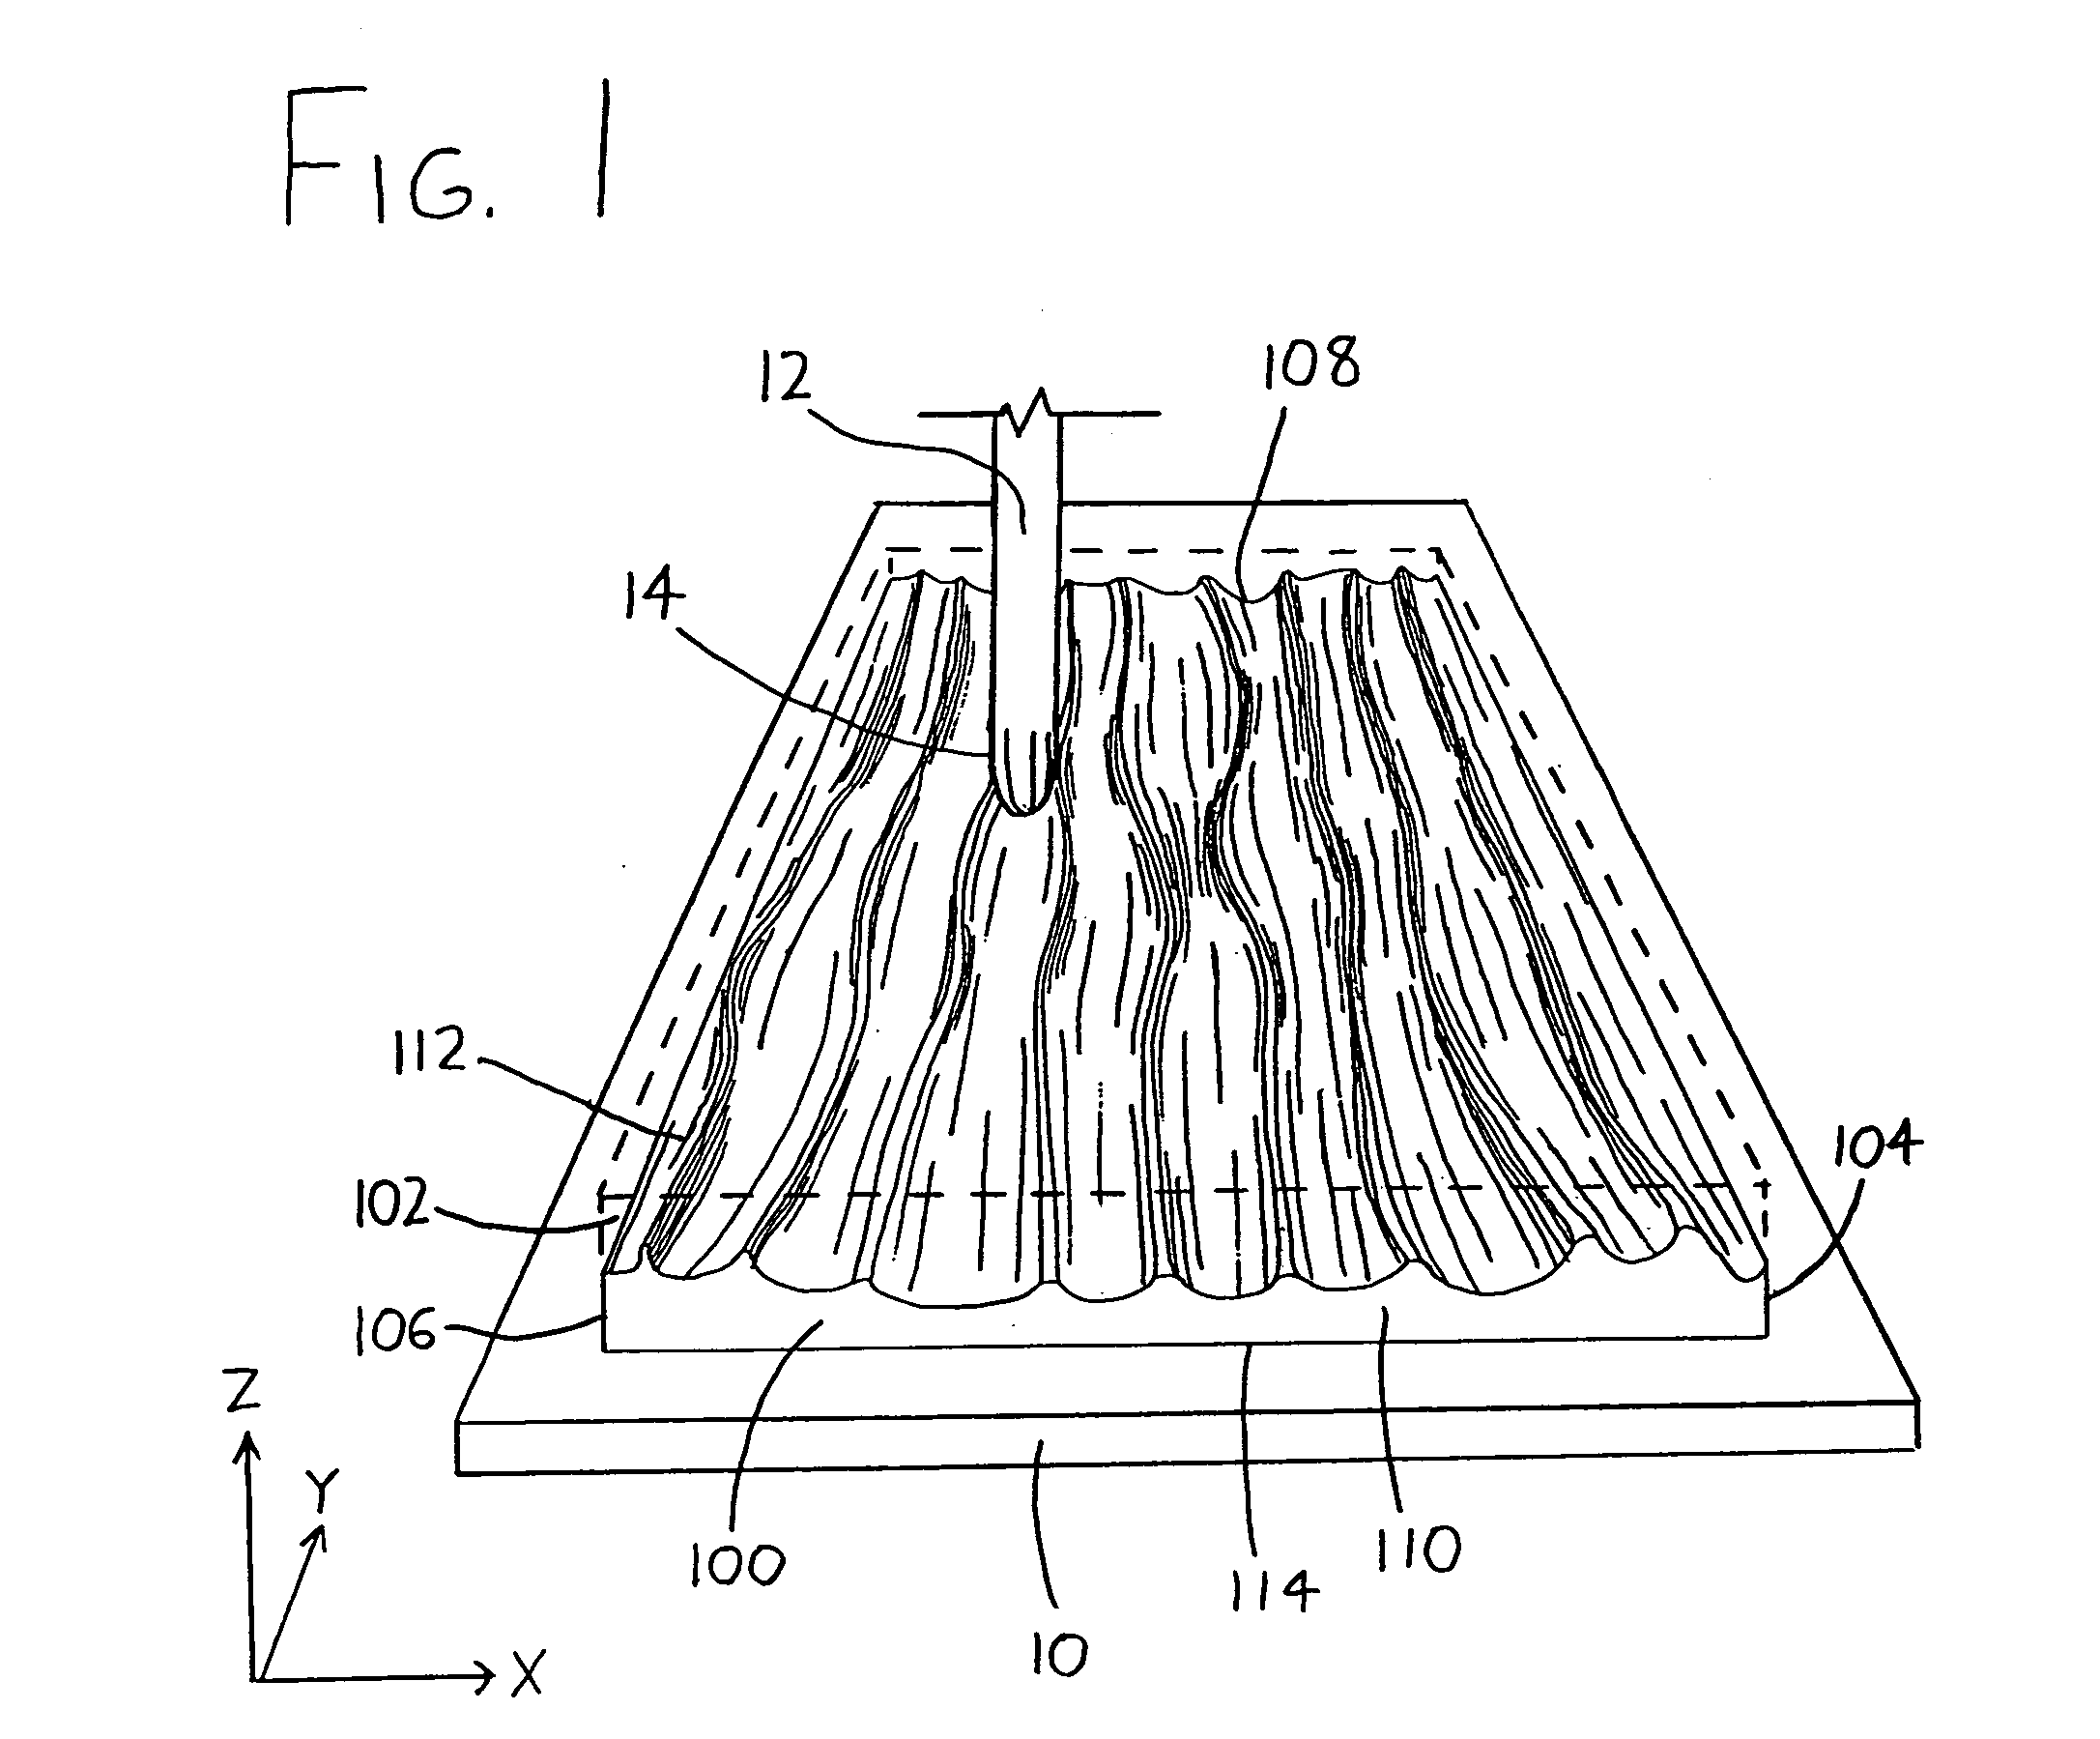 Method for producing unique and highly contoured wall panels